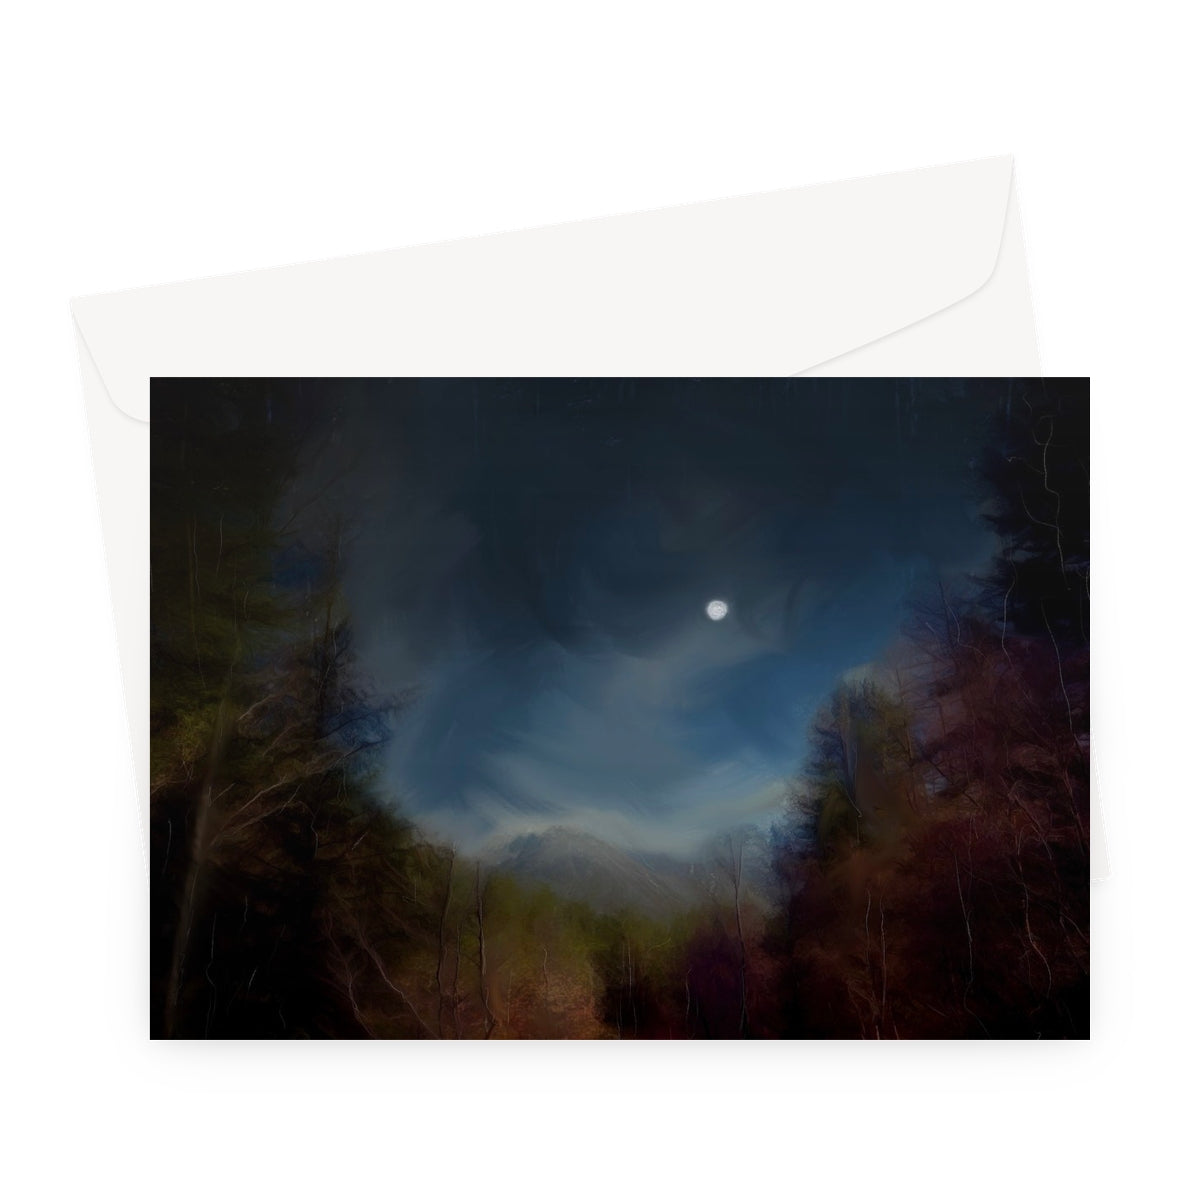 Glencoe Lochan Moonlight Art Gifts Greeting Card-Greetings Cards-Scottish Lochs & Mountains Art Gallery-A5 Landscape-1 Card-Paintings, Prints, Homeware, Art Gifts From Scotland By Scottish Artist Kevin Hunter